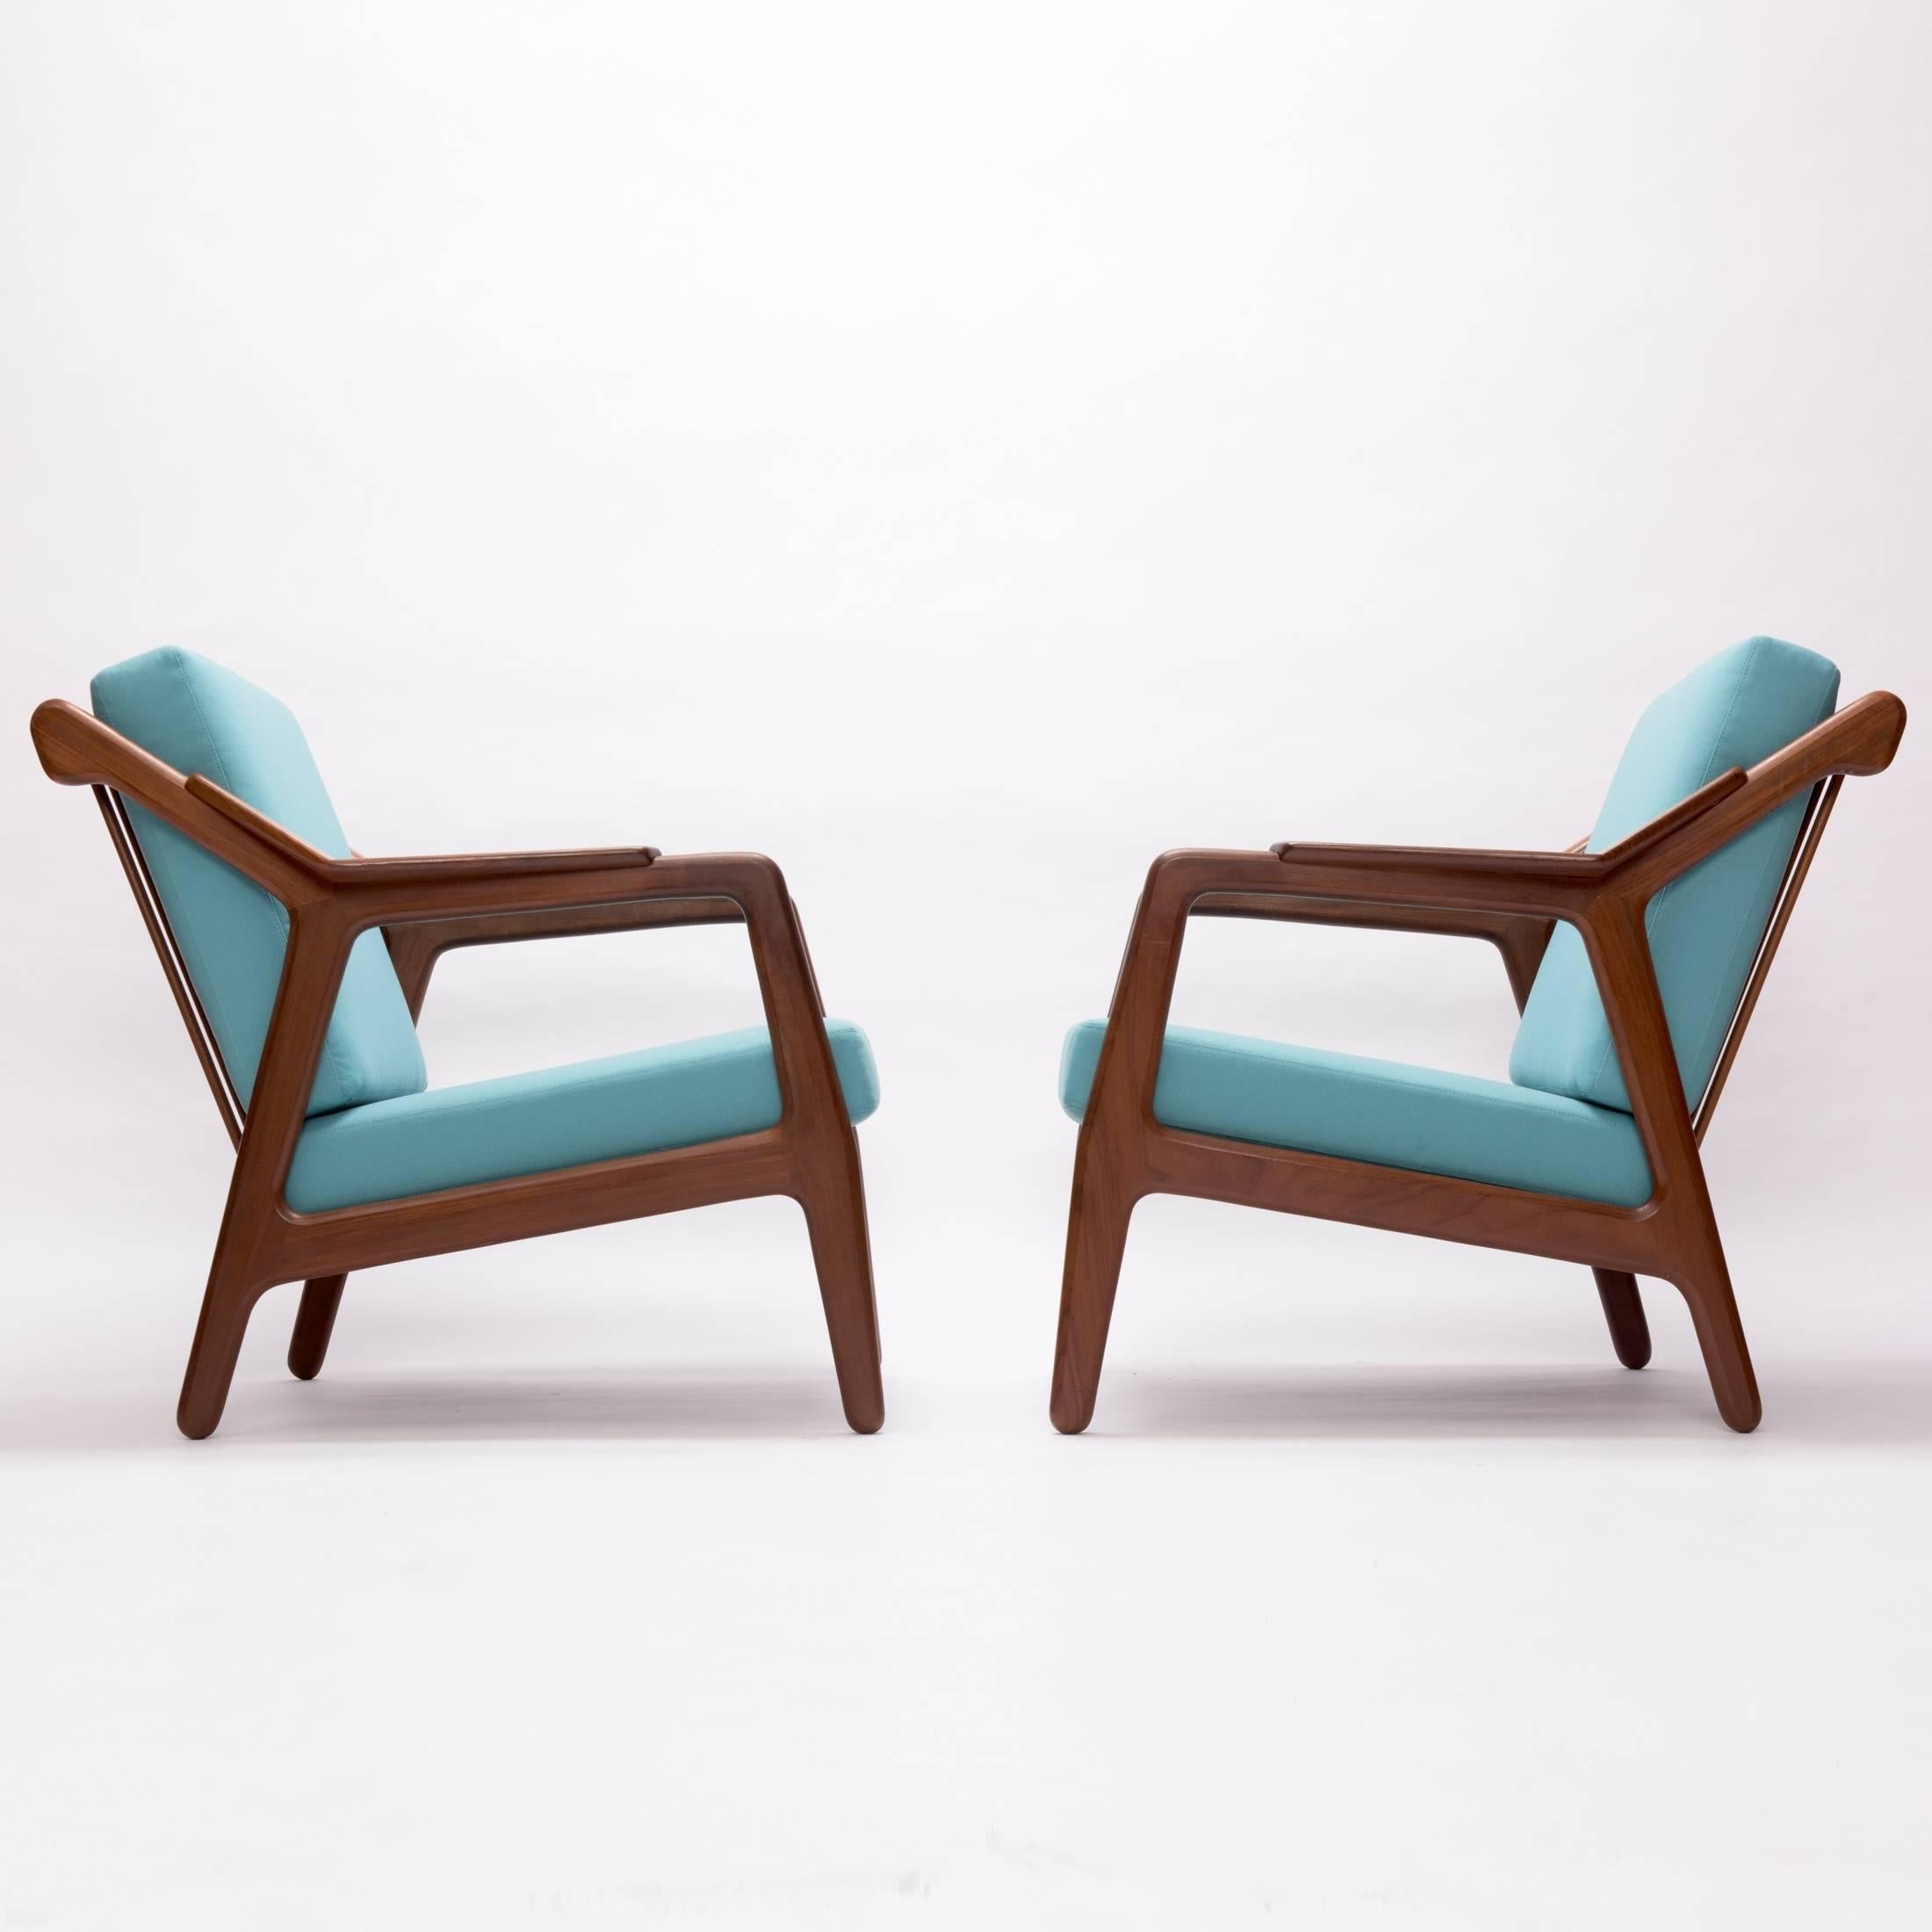 Gorgeous pair of teak easy chairs, designed 1955, with exposed teak frame and loose cushions in soft turquoise.
Designer: H. Brockmann Petersen.
Manufacturer: Randers Møbler, Denmark.
Excellent vintage condition, re-upholstered in high quality